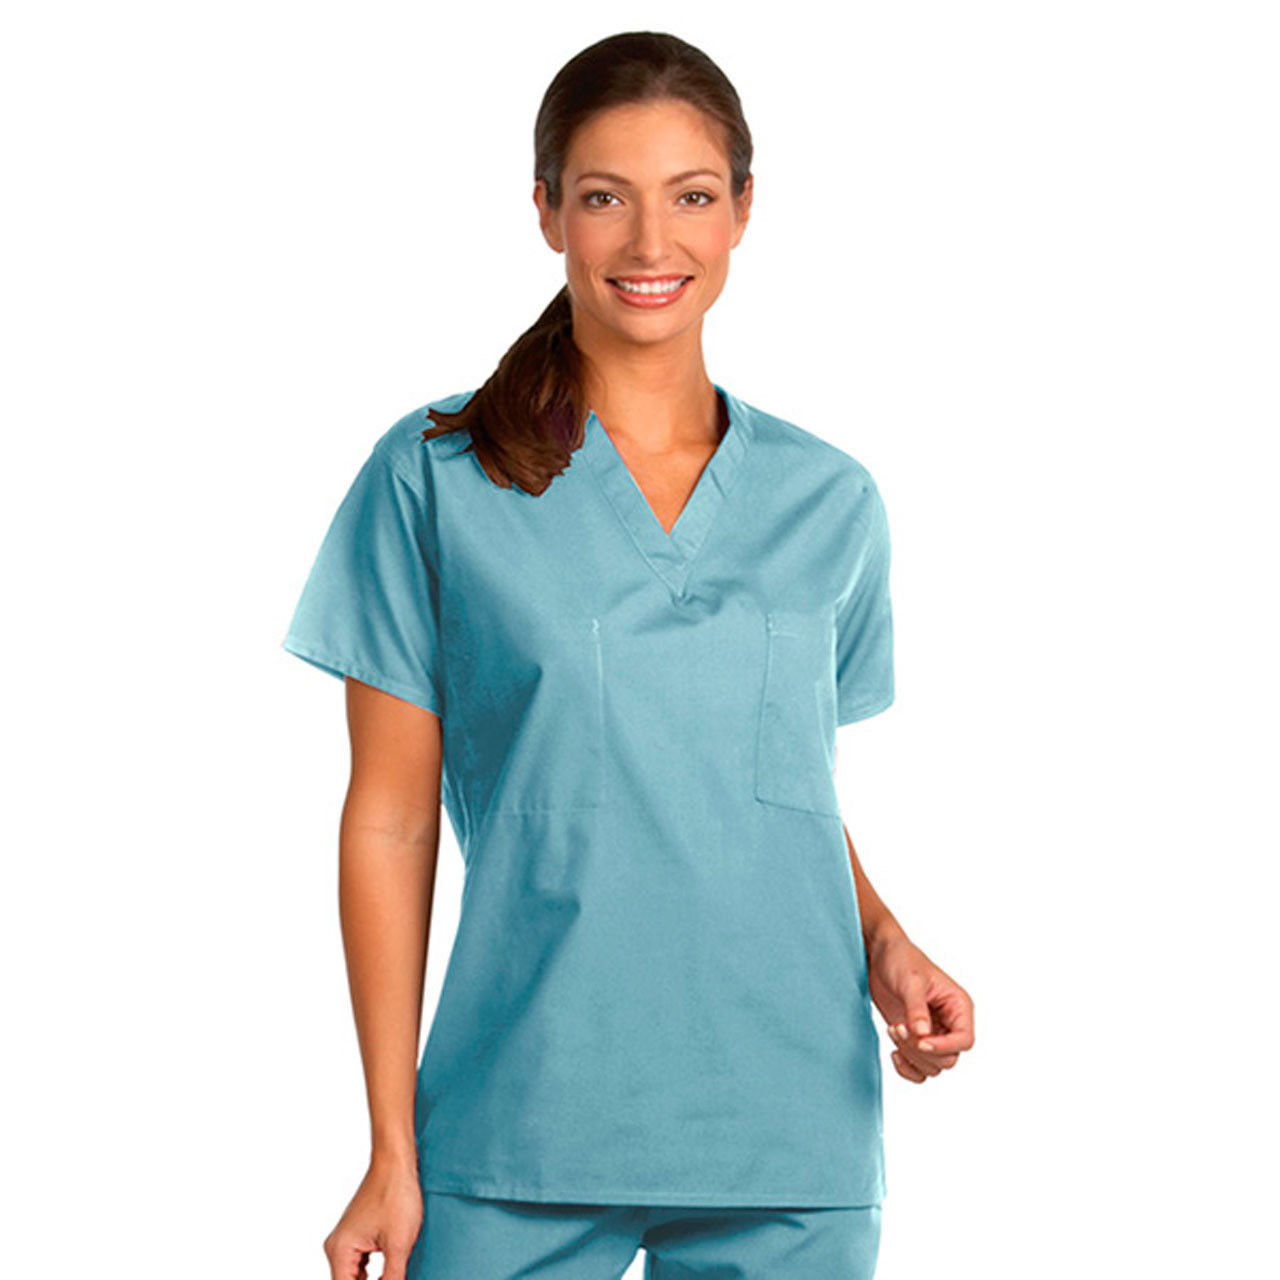 What specific features do these surgical scrubs have, particularly the scrub bottoms?